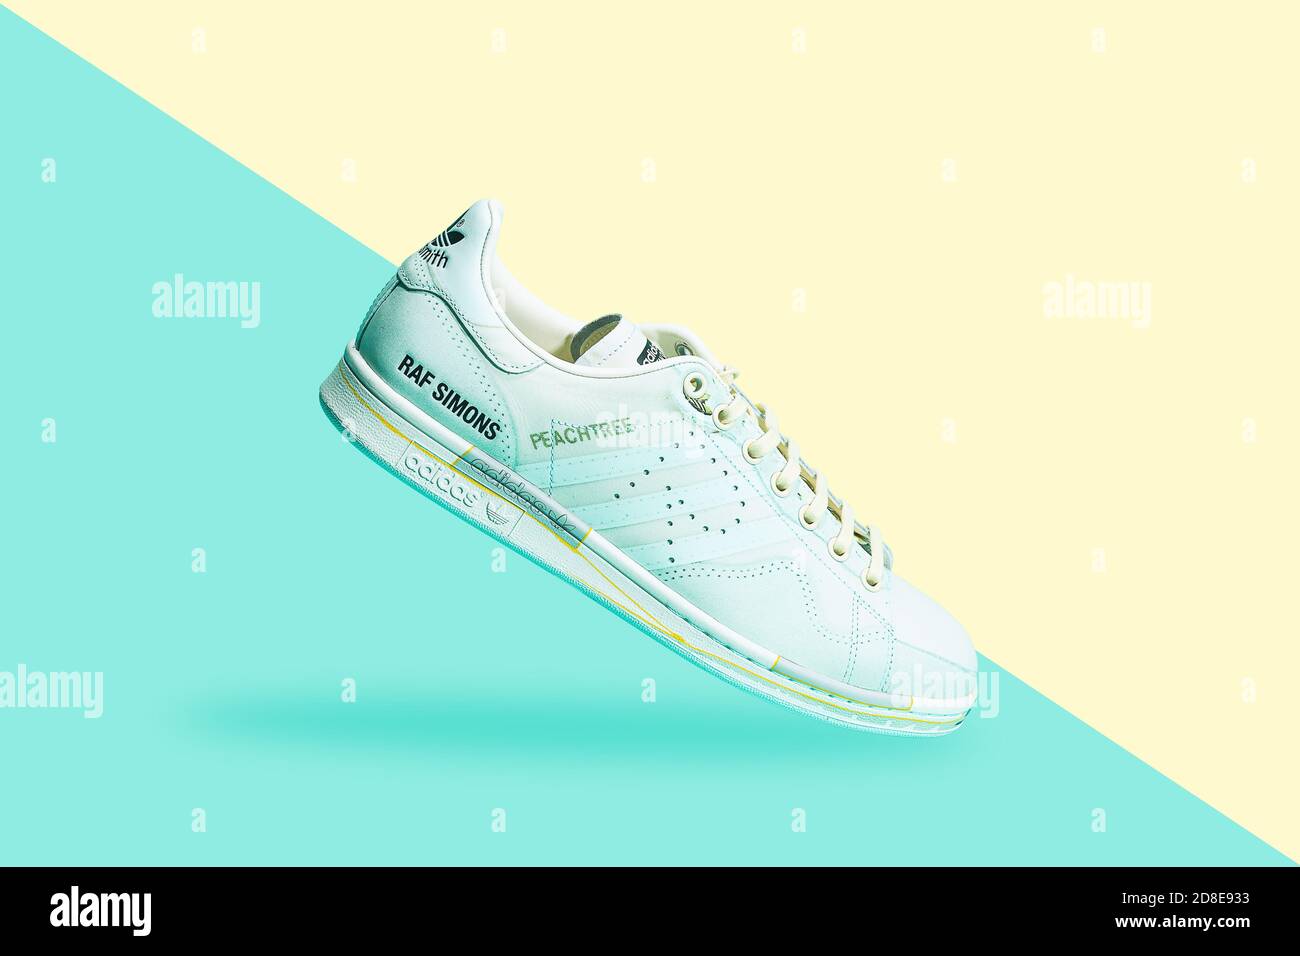 nooit auteur vijand MONTERREY, MEXICO - May 25, 2019: MONTERREY, NL, MEXICO - MAY 24, 2019 : Stan  Smith and Raf Simons famous designers of the classic adidas shoe, isolat  Stock Photo - Alamy